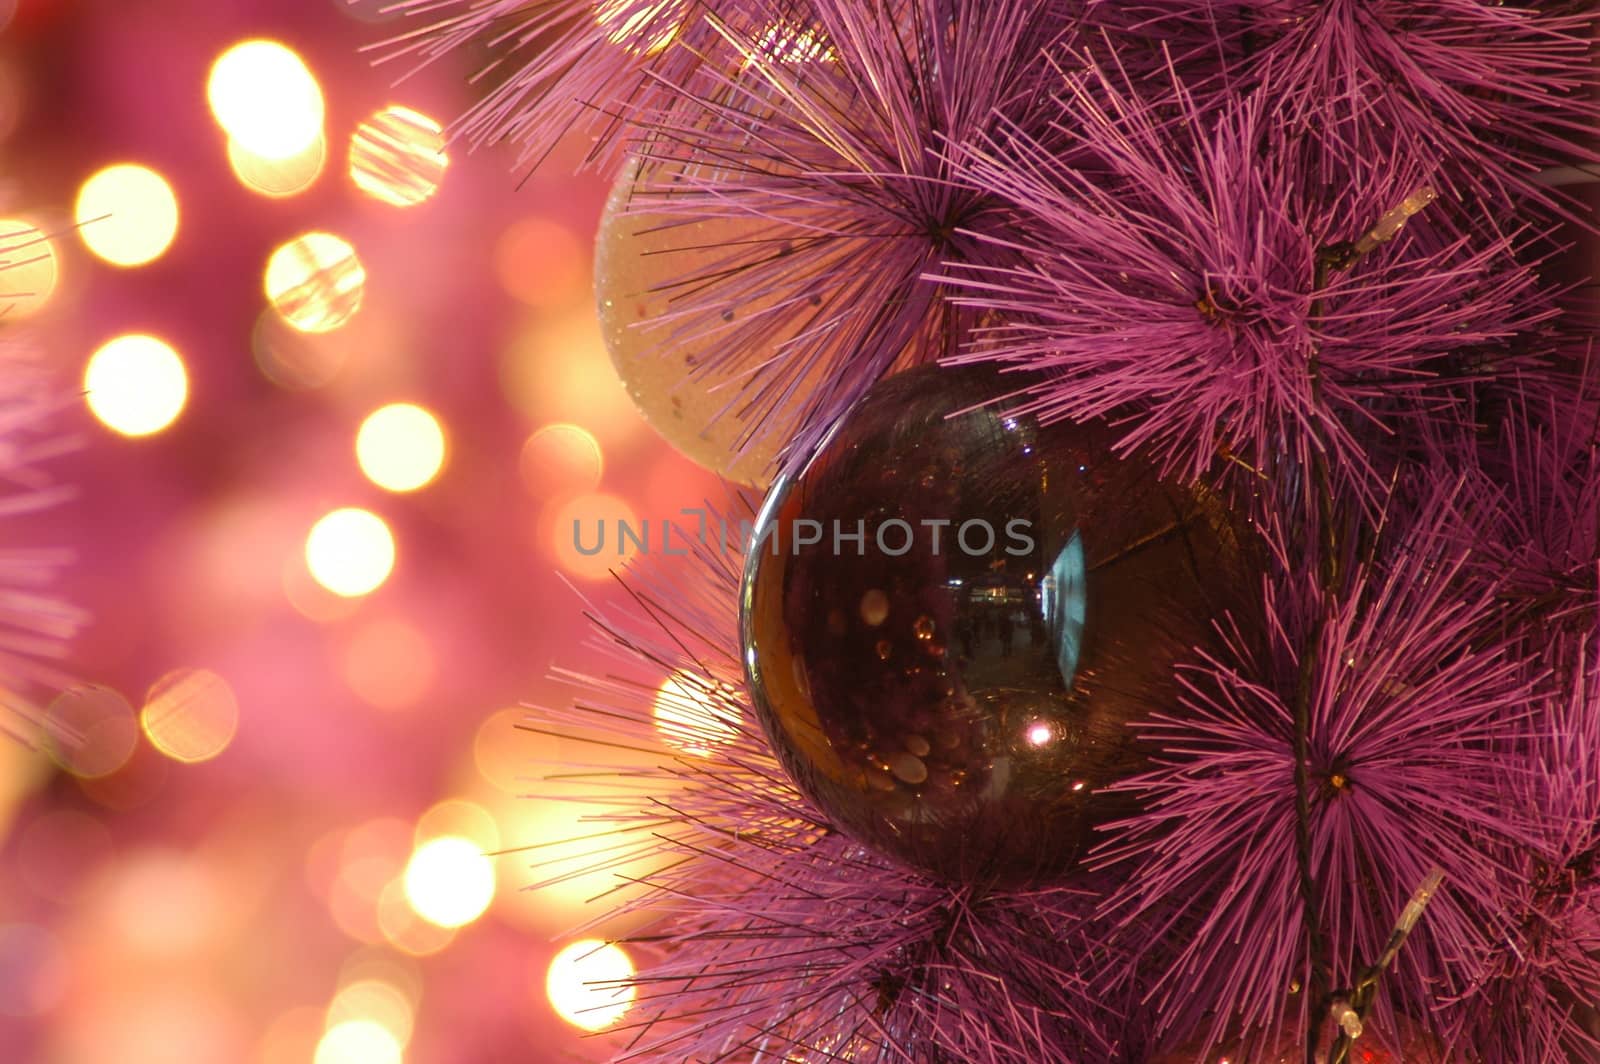 In images Shiny Christmas red ball hanging on pine branches with festive background